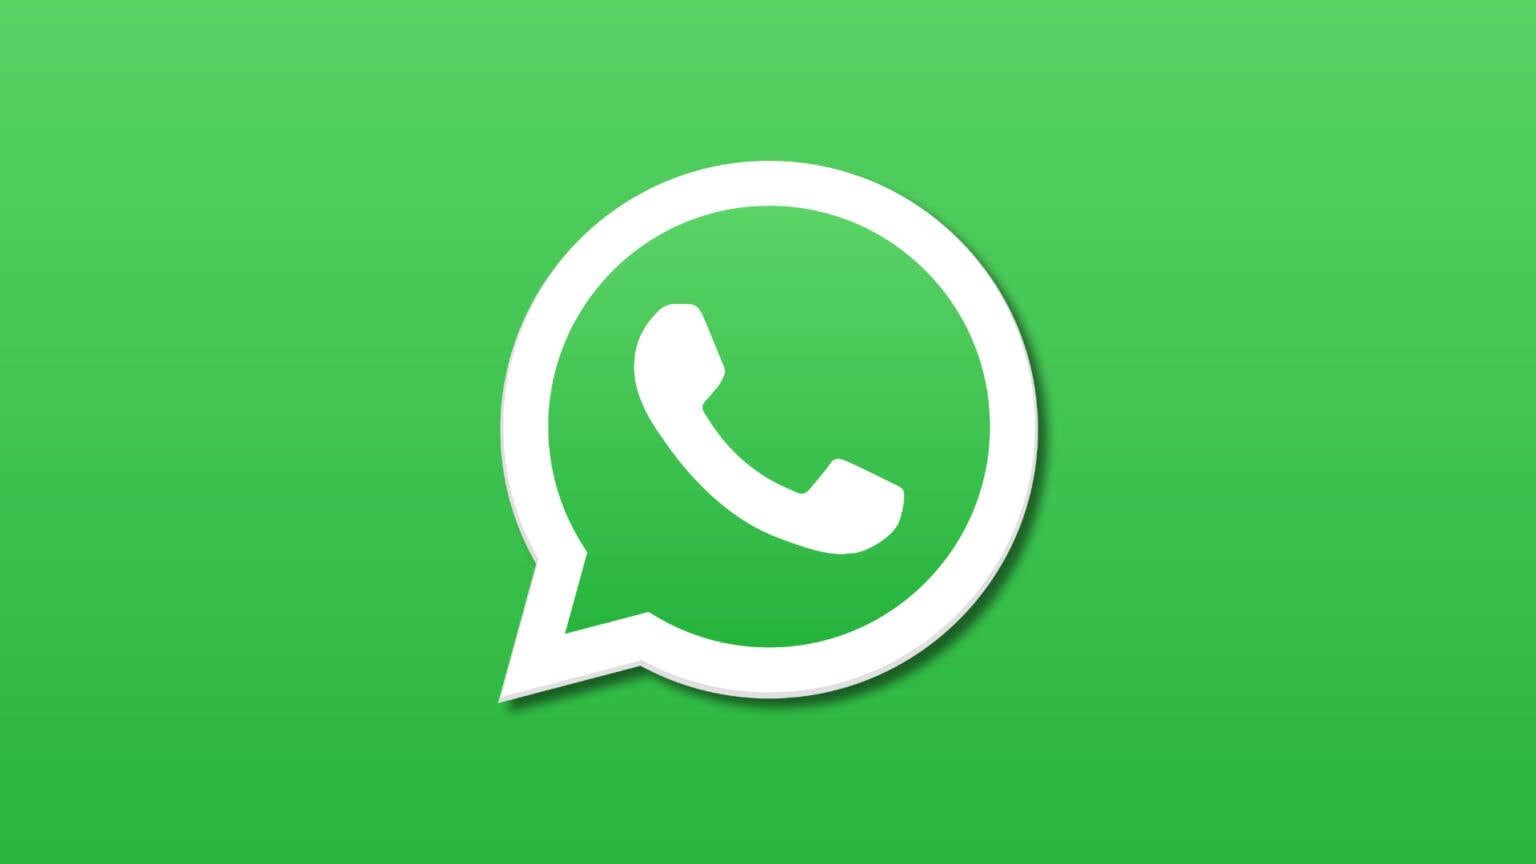 WhatsApp’s native Apple silicon Mac app in beta gets a wider release